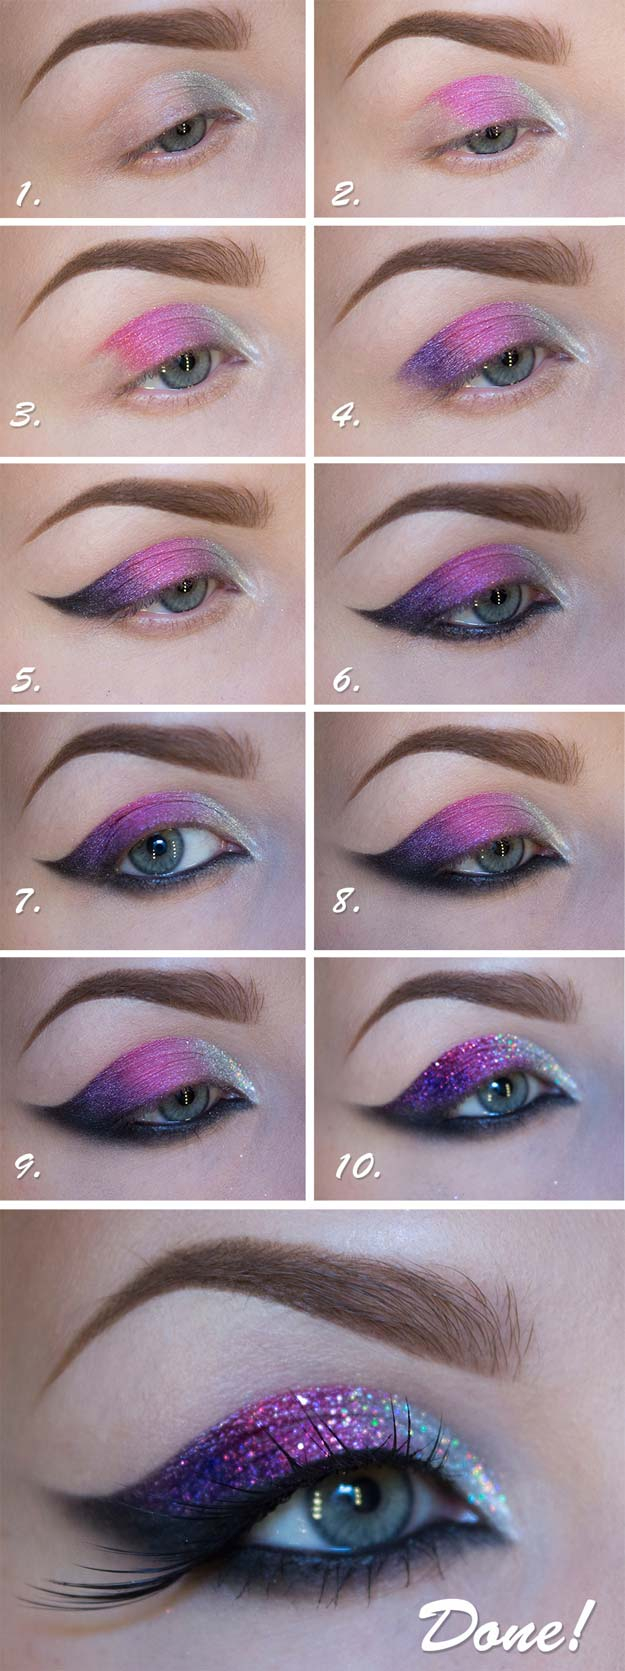 Makeup For Homecoming For Brown Eyes 38 Makeup Ideas For Prom The Goddess